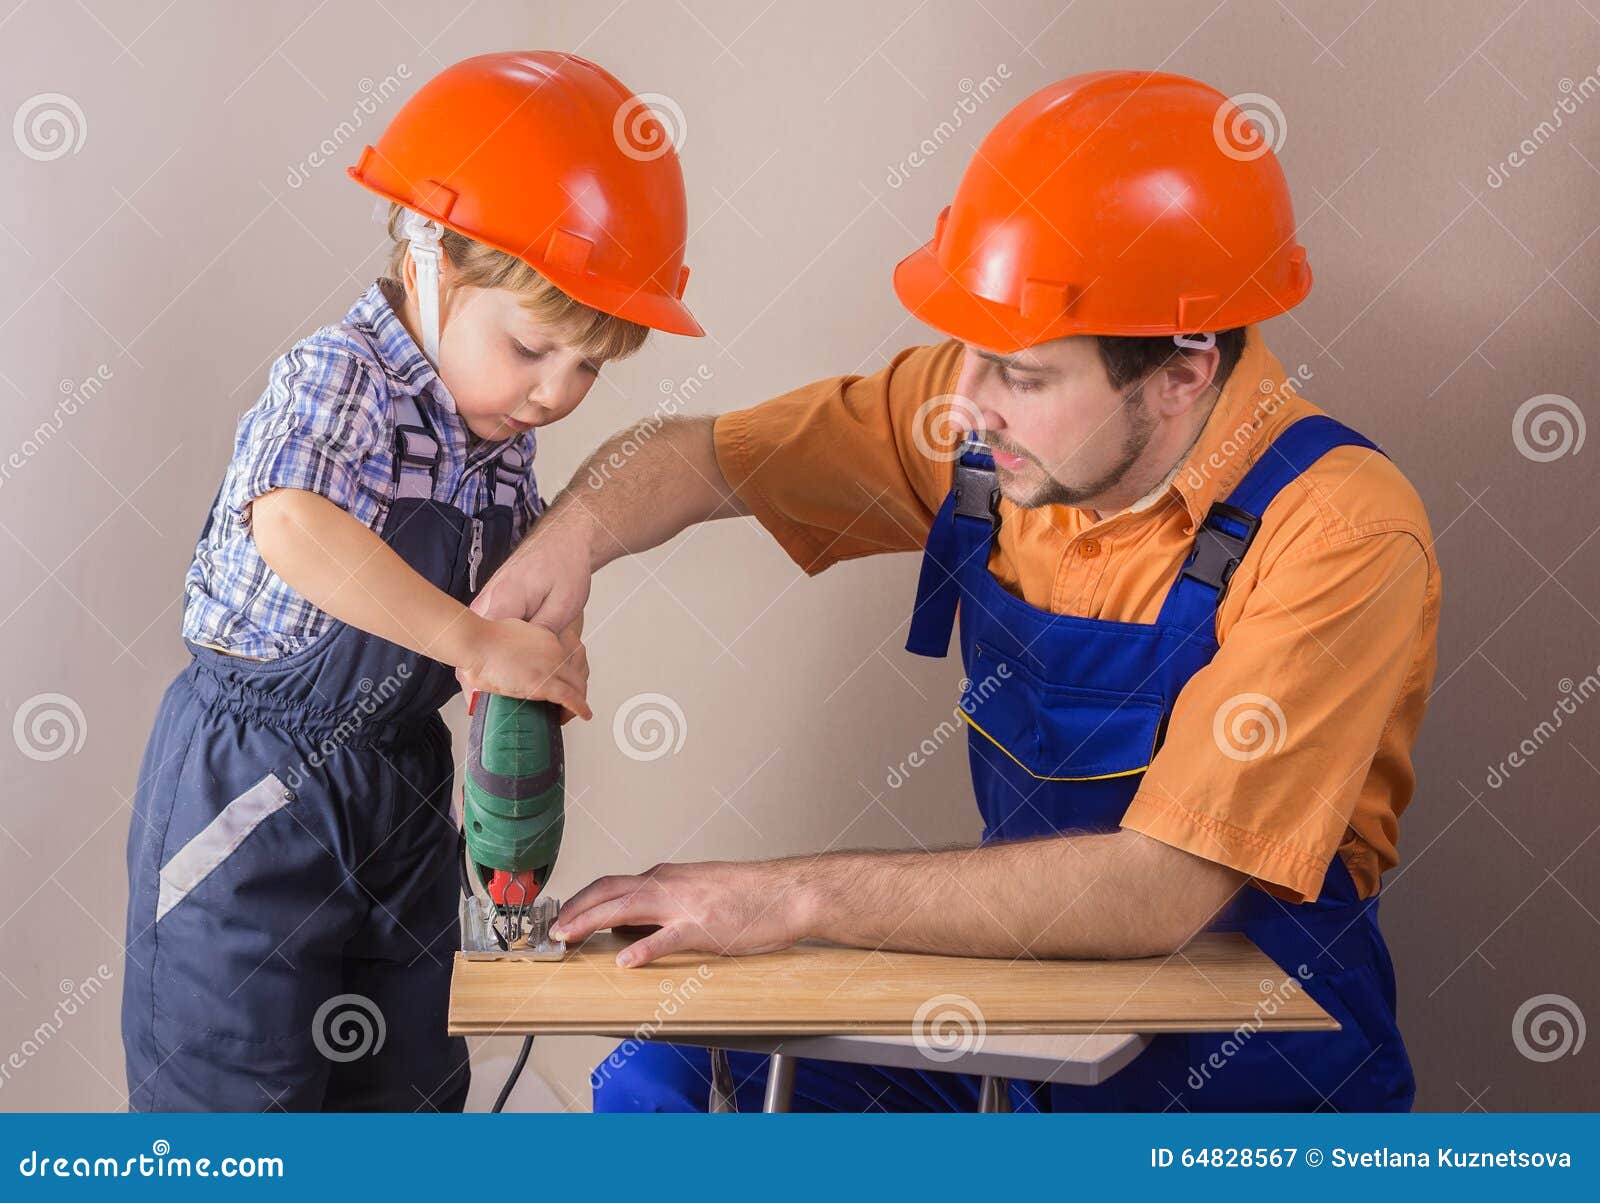 dad with young son in protective helmet working jigsaw